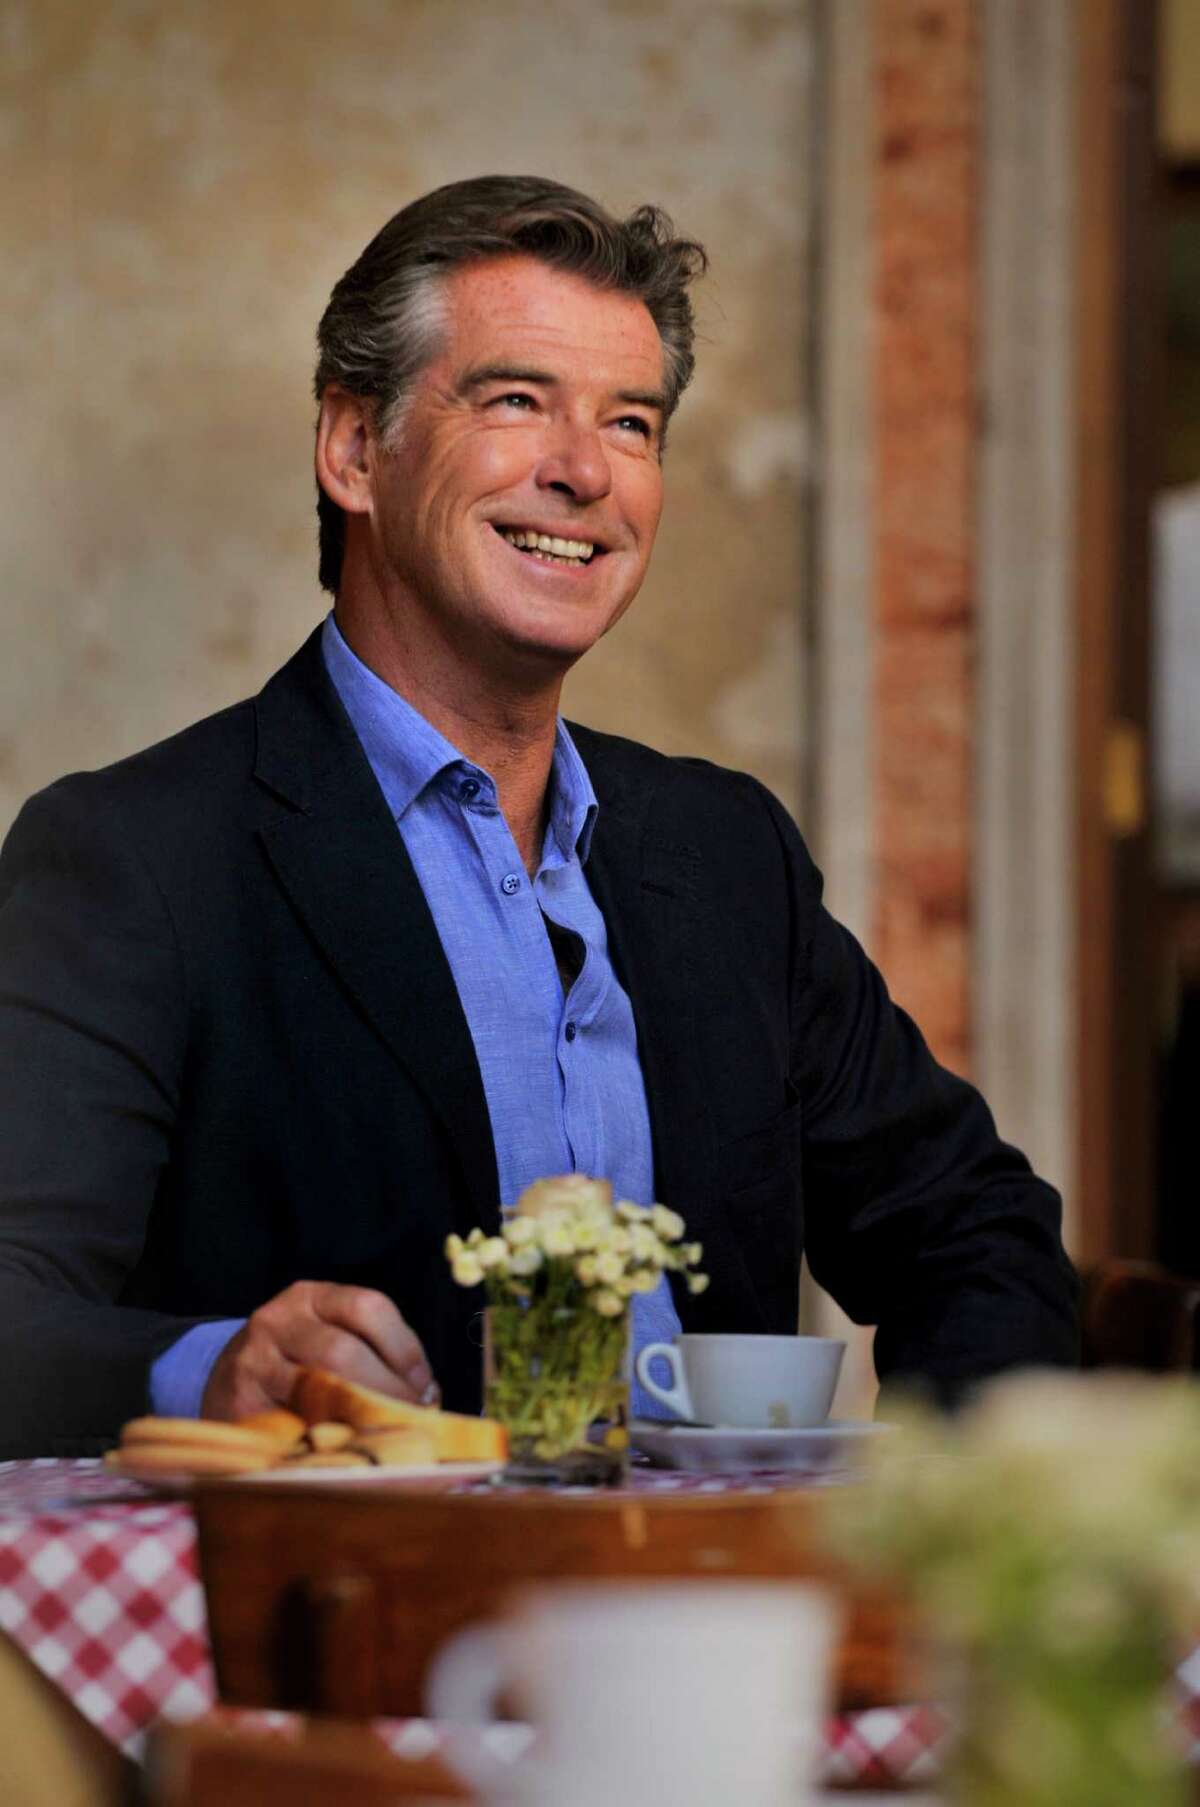 Pierce Brosnan was drawn to Susanne Bier's "Love Is All You Need," in which he plays Philip, a businessman who rediscovers hope.